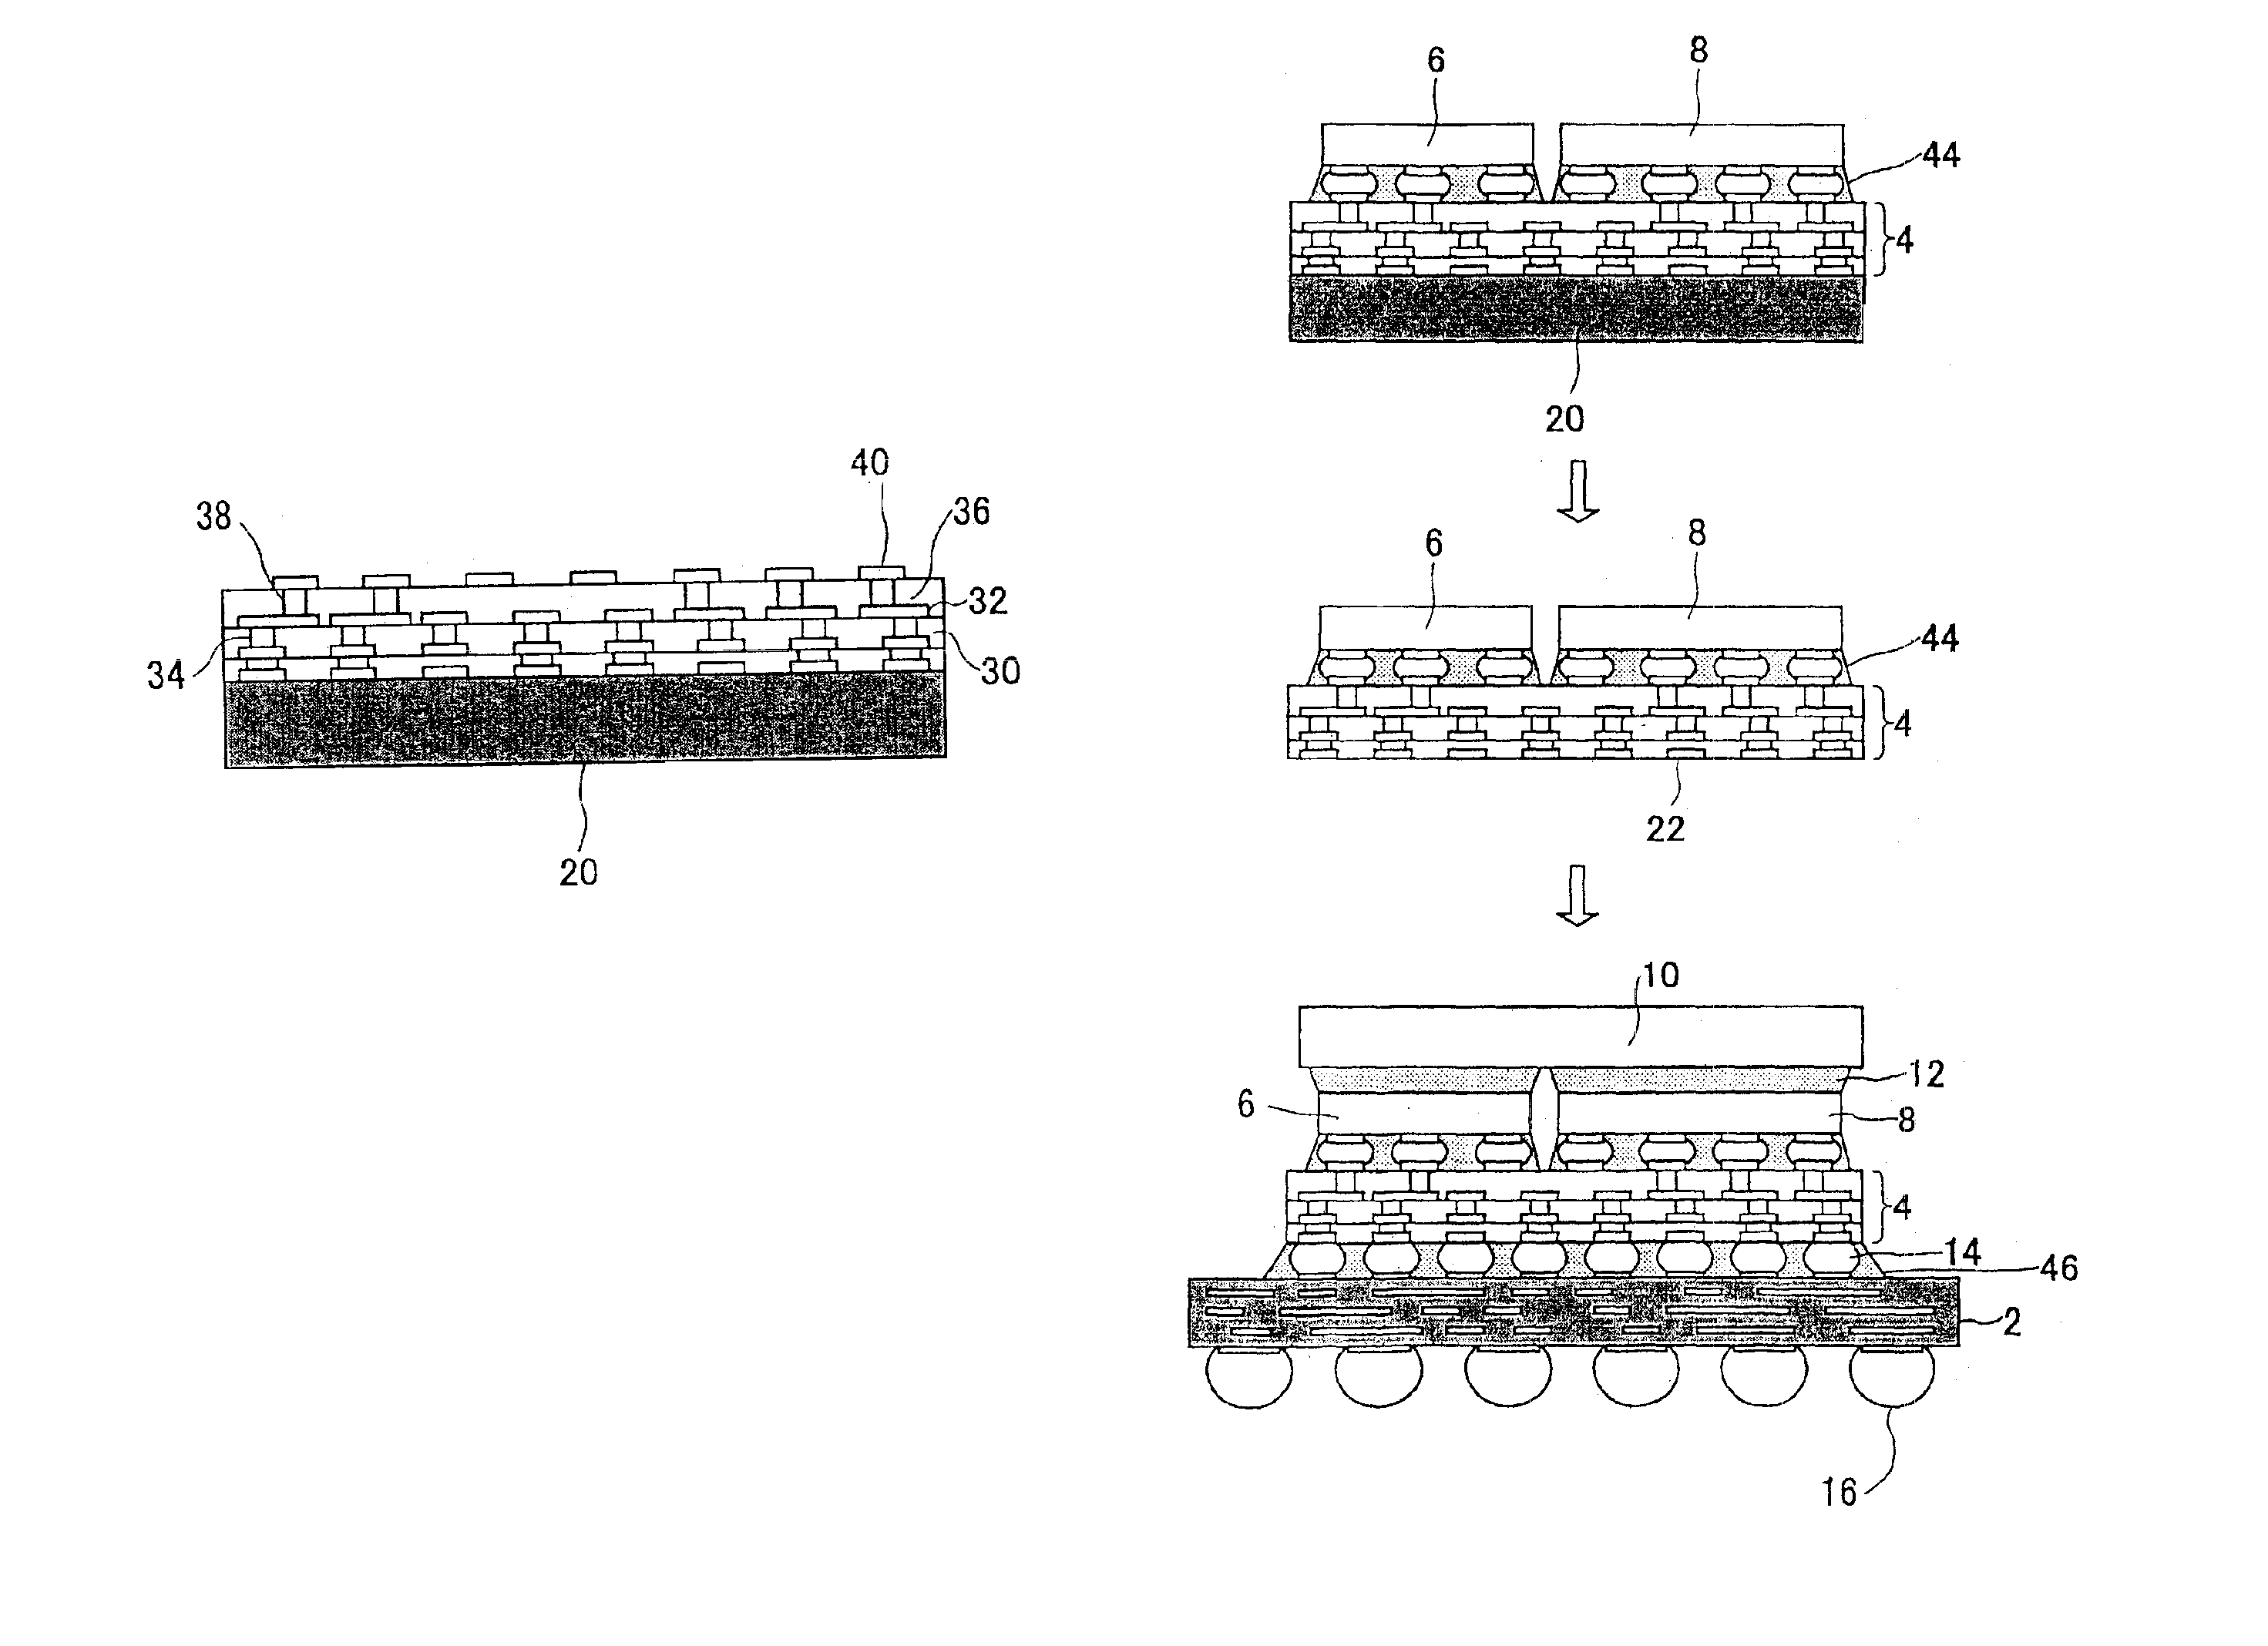 Manufacturing method of a semiconductor device incorporating a passive element and a redistribution board